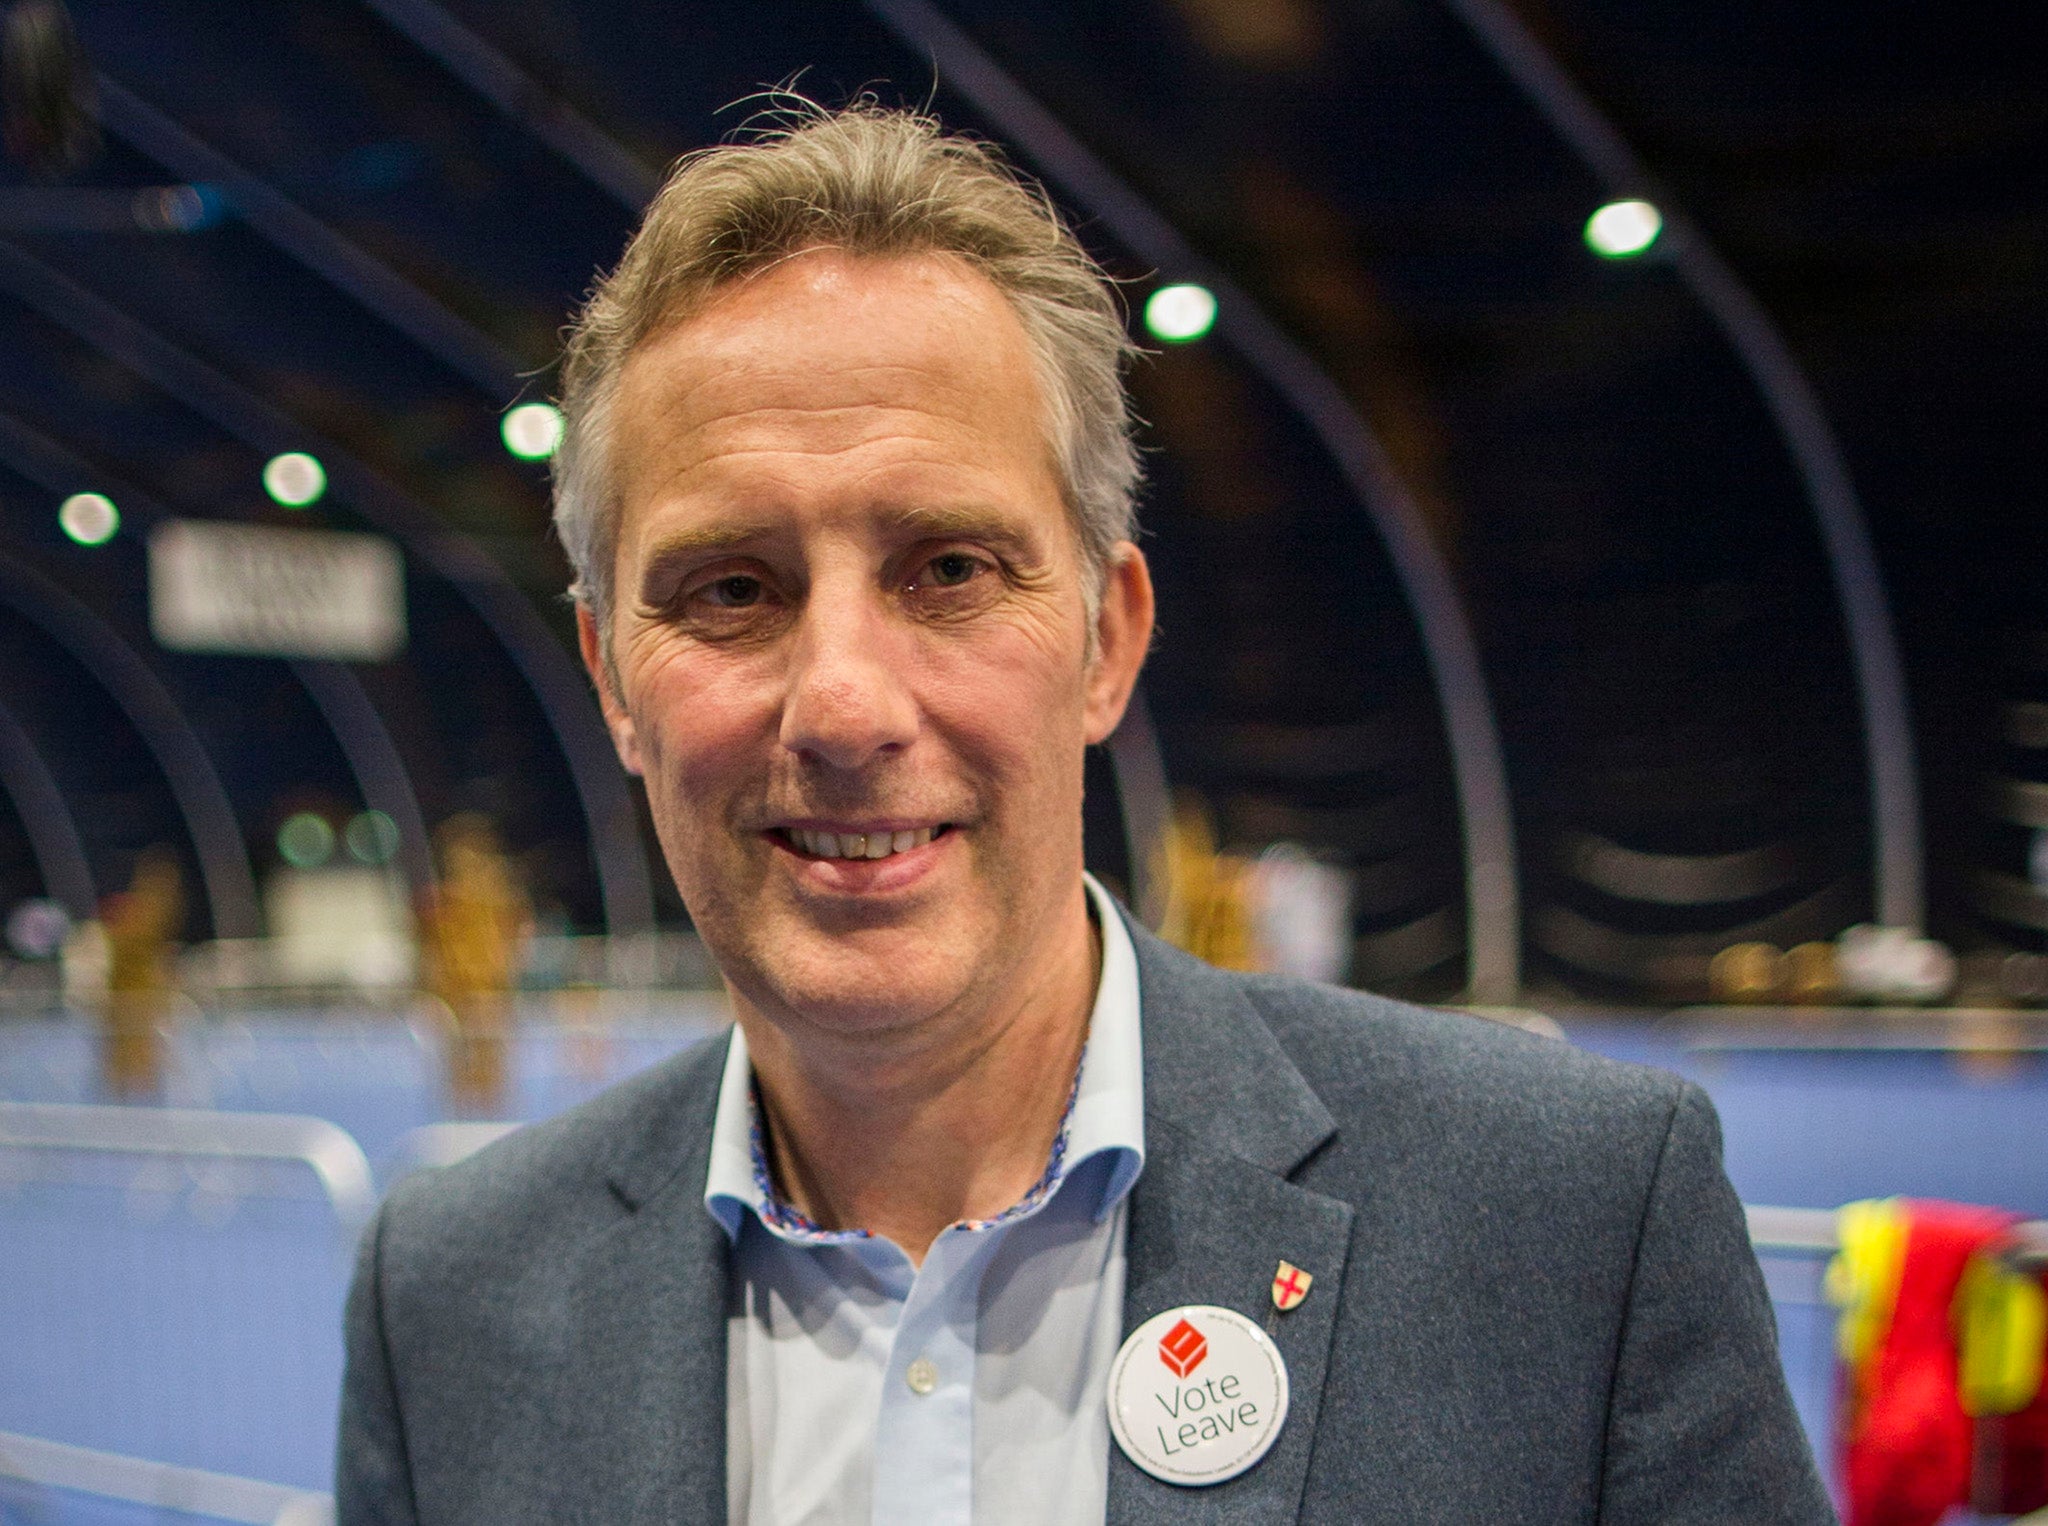 Ian Paisley Jr, MP for North Antrim in Northern Ireland